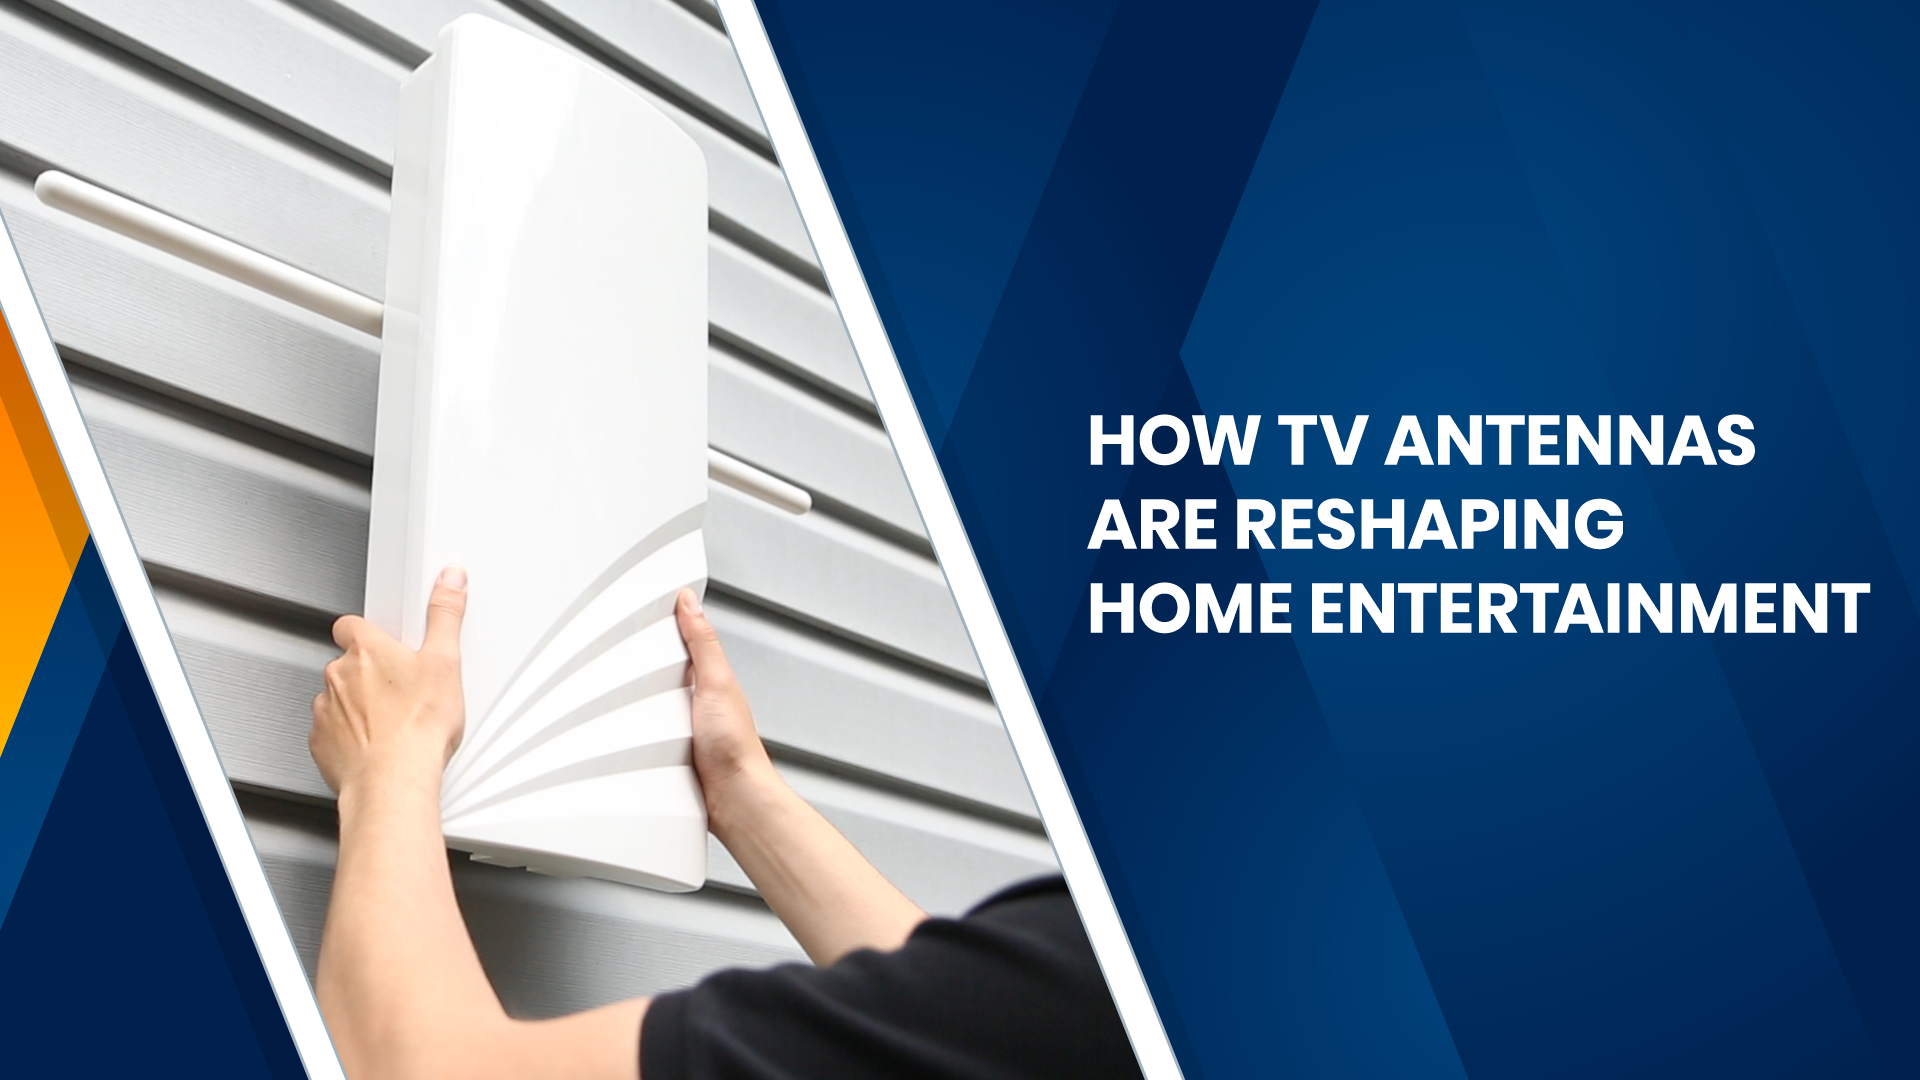 How TV Antennas Are Reshaping Home Entertainment?